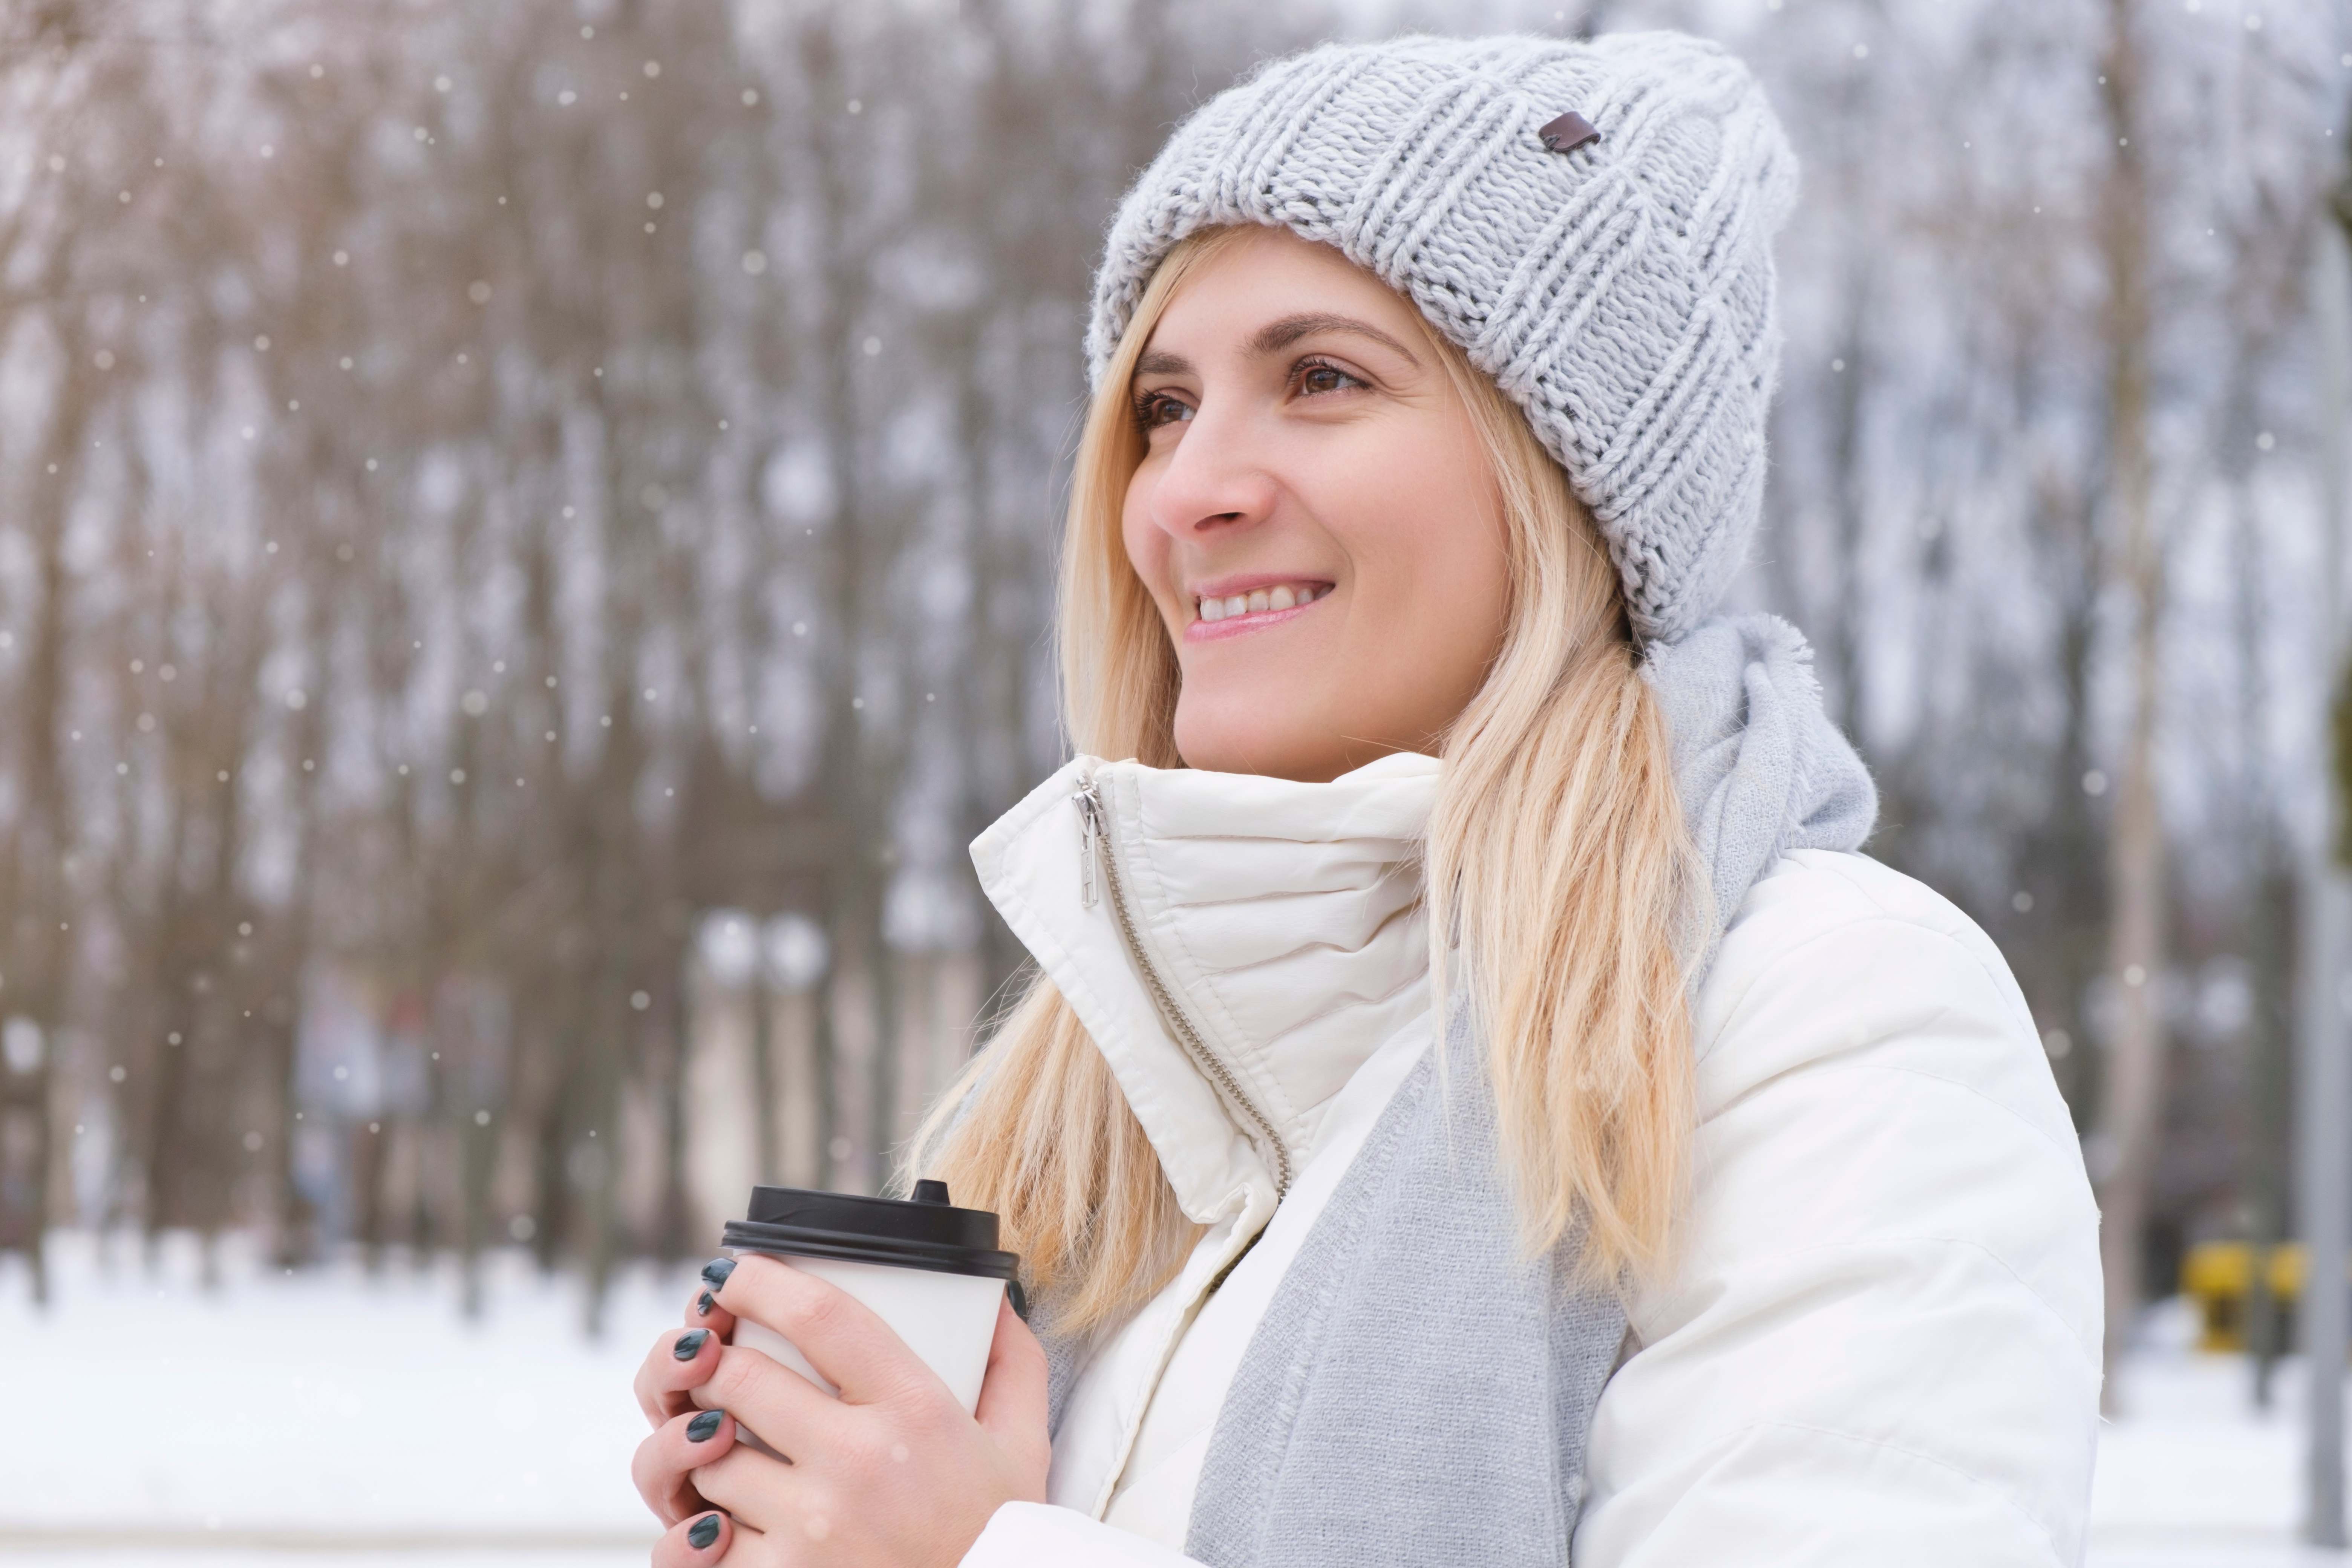 A woman enjoys some alone time outdoors with a cup of coffee on a cold February afternoon.